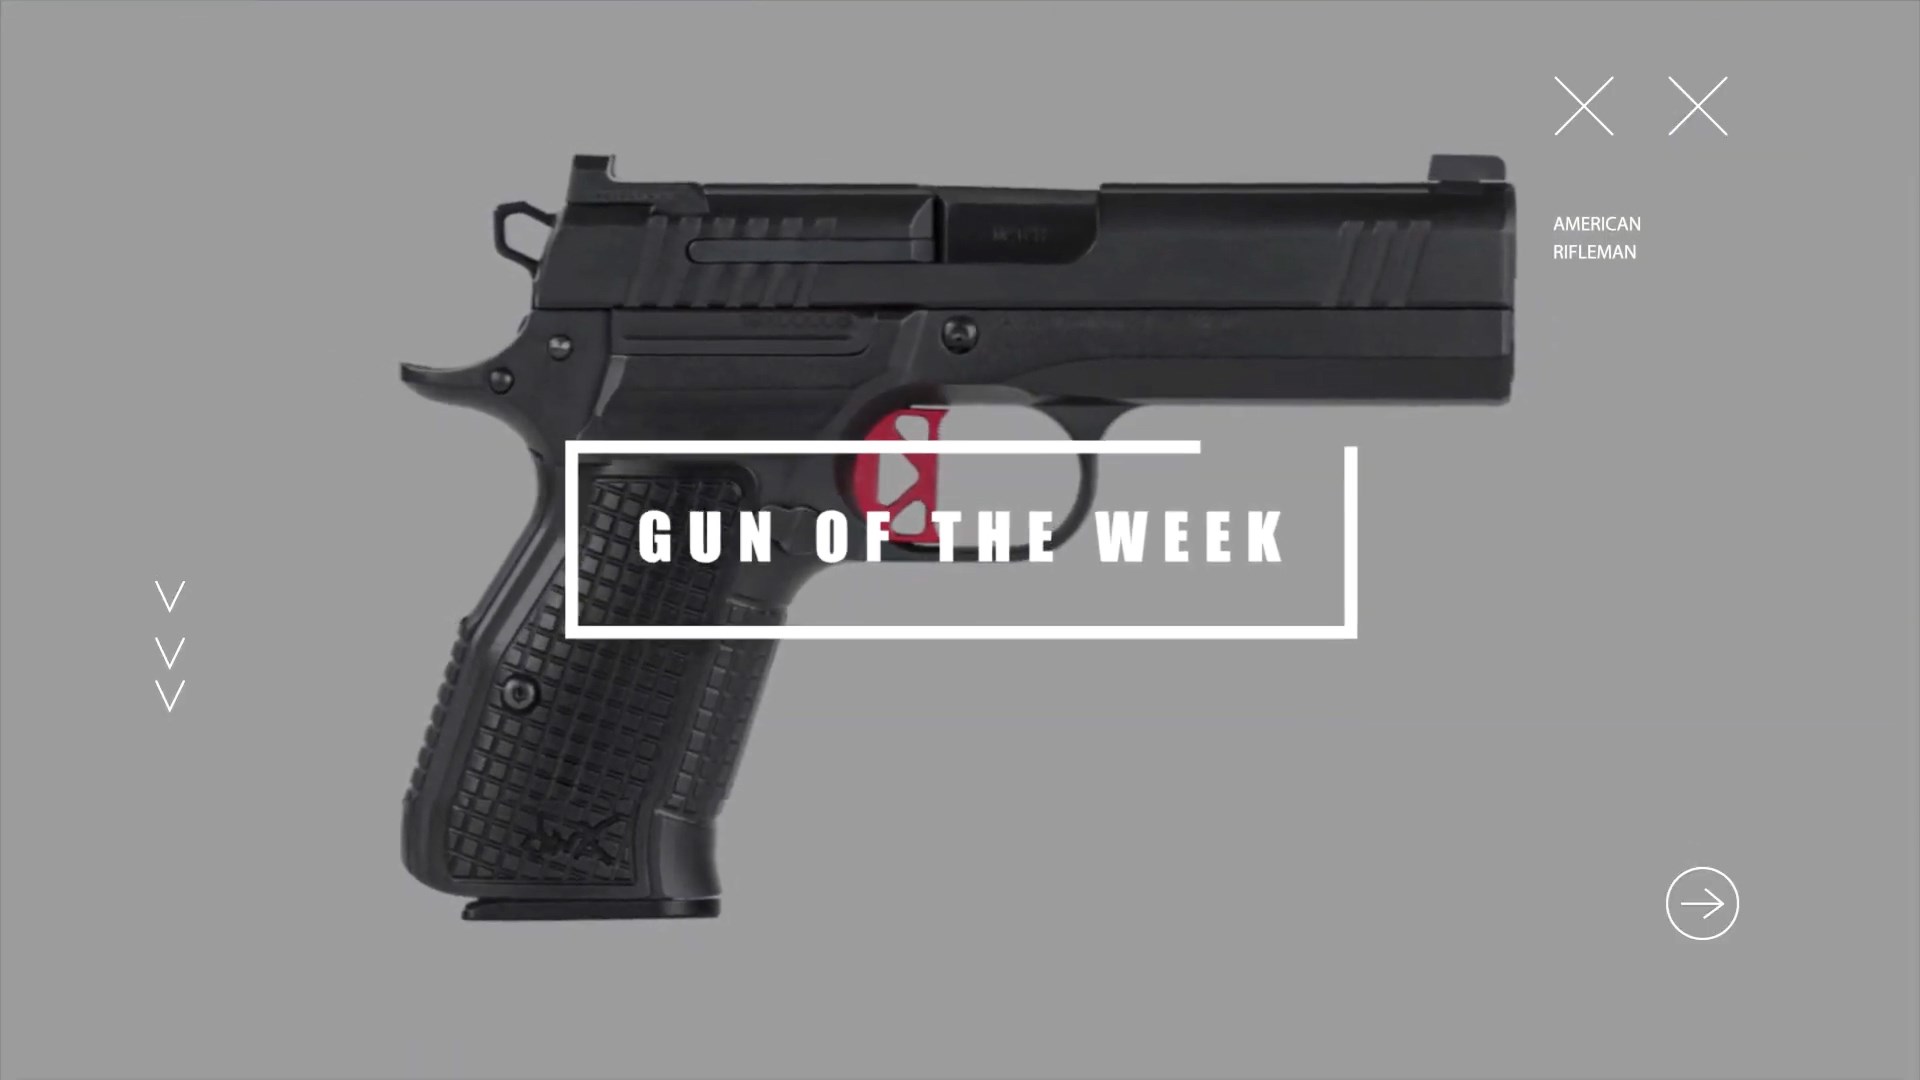 GOTW Gun Of The Week title screen with text and box overlay Dan Wesson DWX Compact pistol right side 9 mm